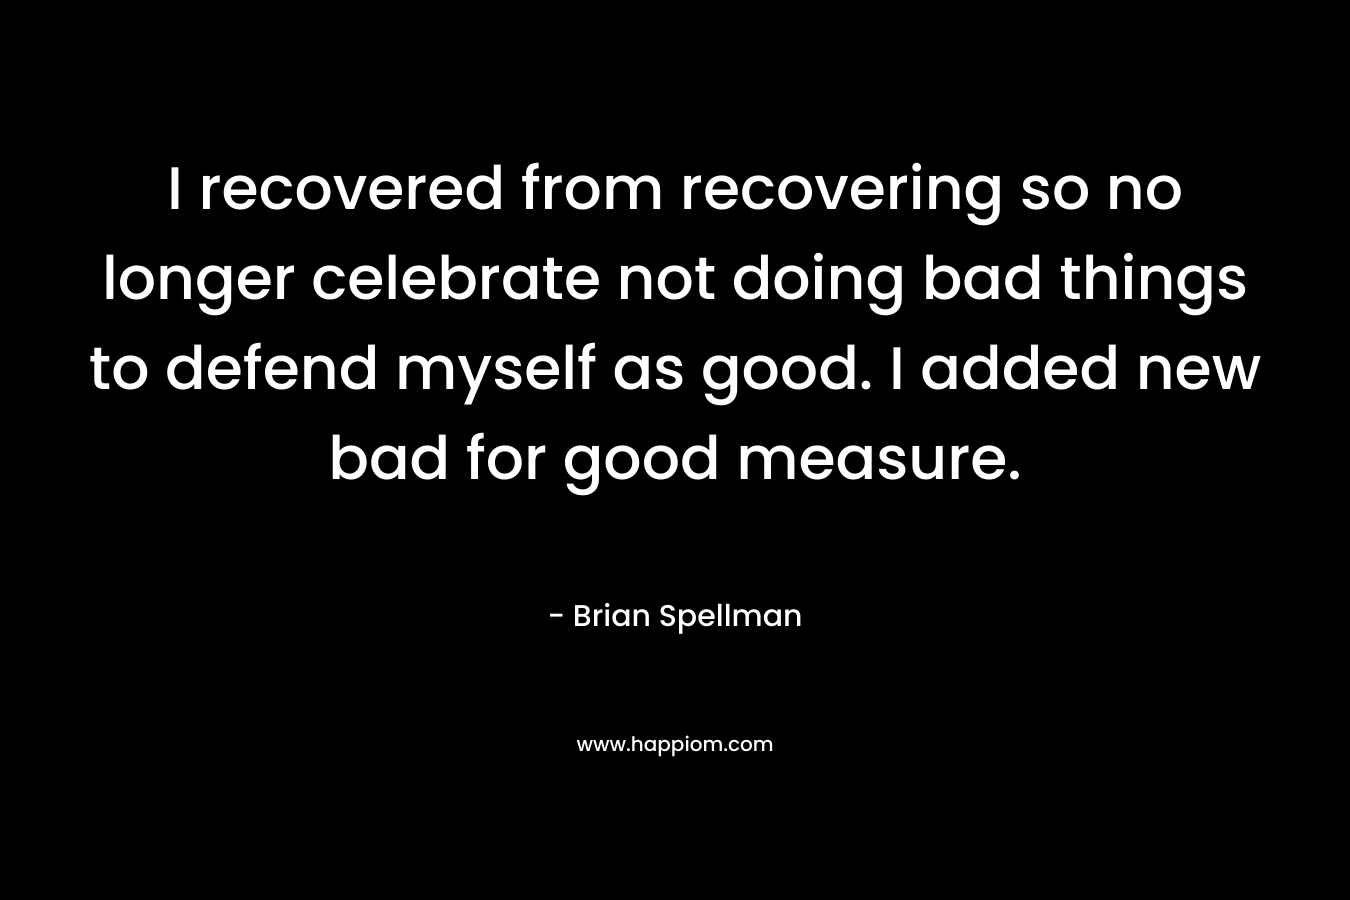 I recovered from recovering so no longer celebrate not doing bad things to defend myself as good. I added new bad for good measure. – Brian Spellman